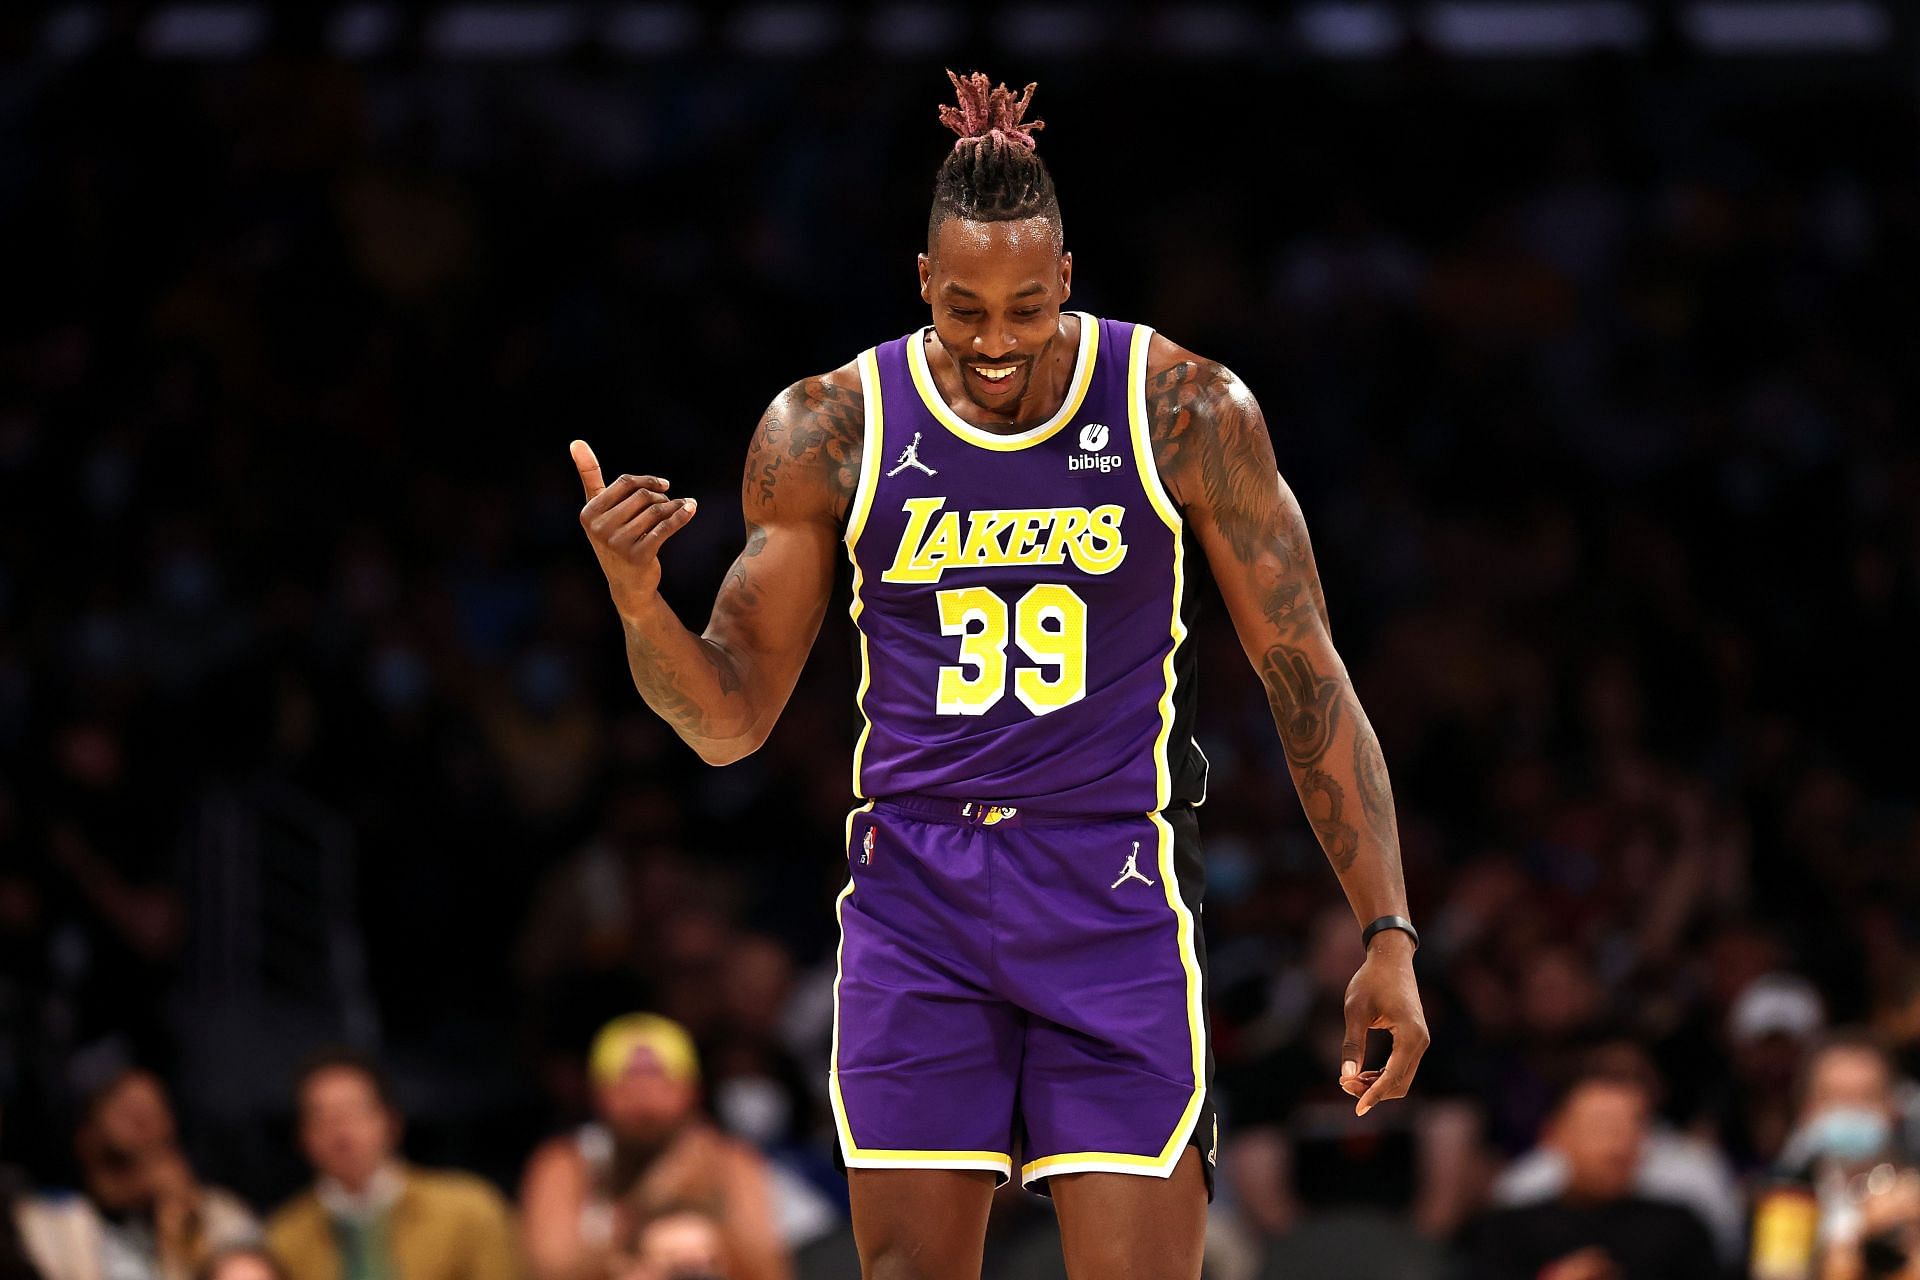 Dwight Howard #39 of the Los Angeles Lakers reacts after being fouled during the first half of a game against the Miami Heat at Staples Center on November 10, 2021 in Los Angeles, California.